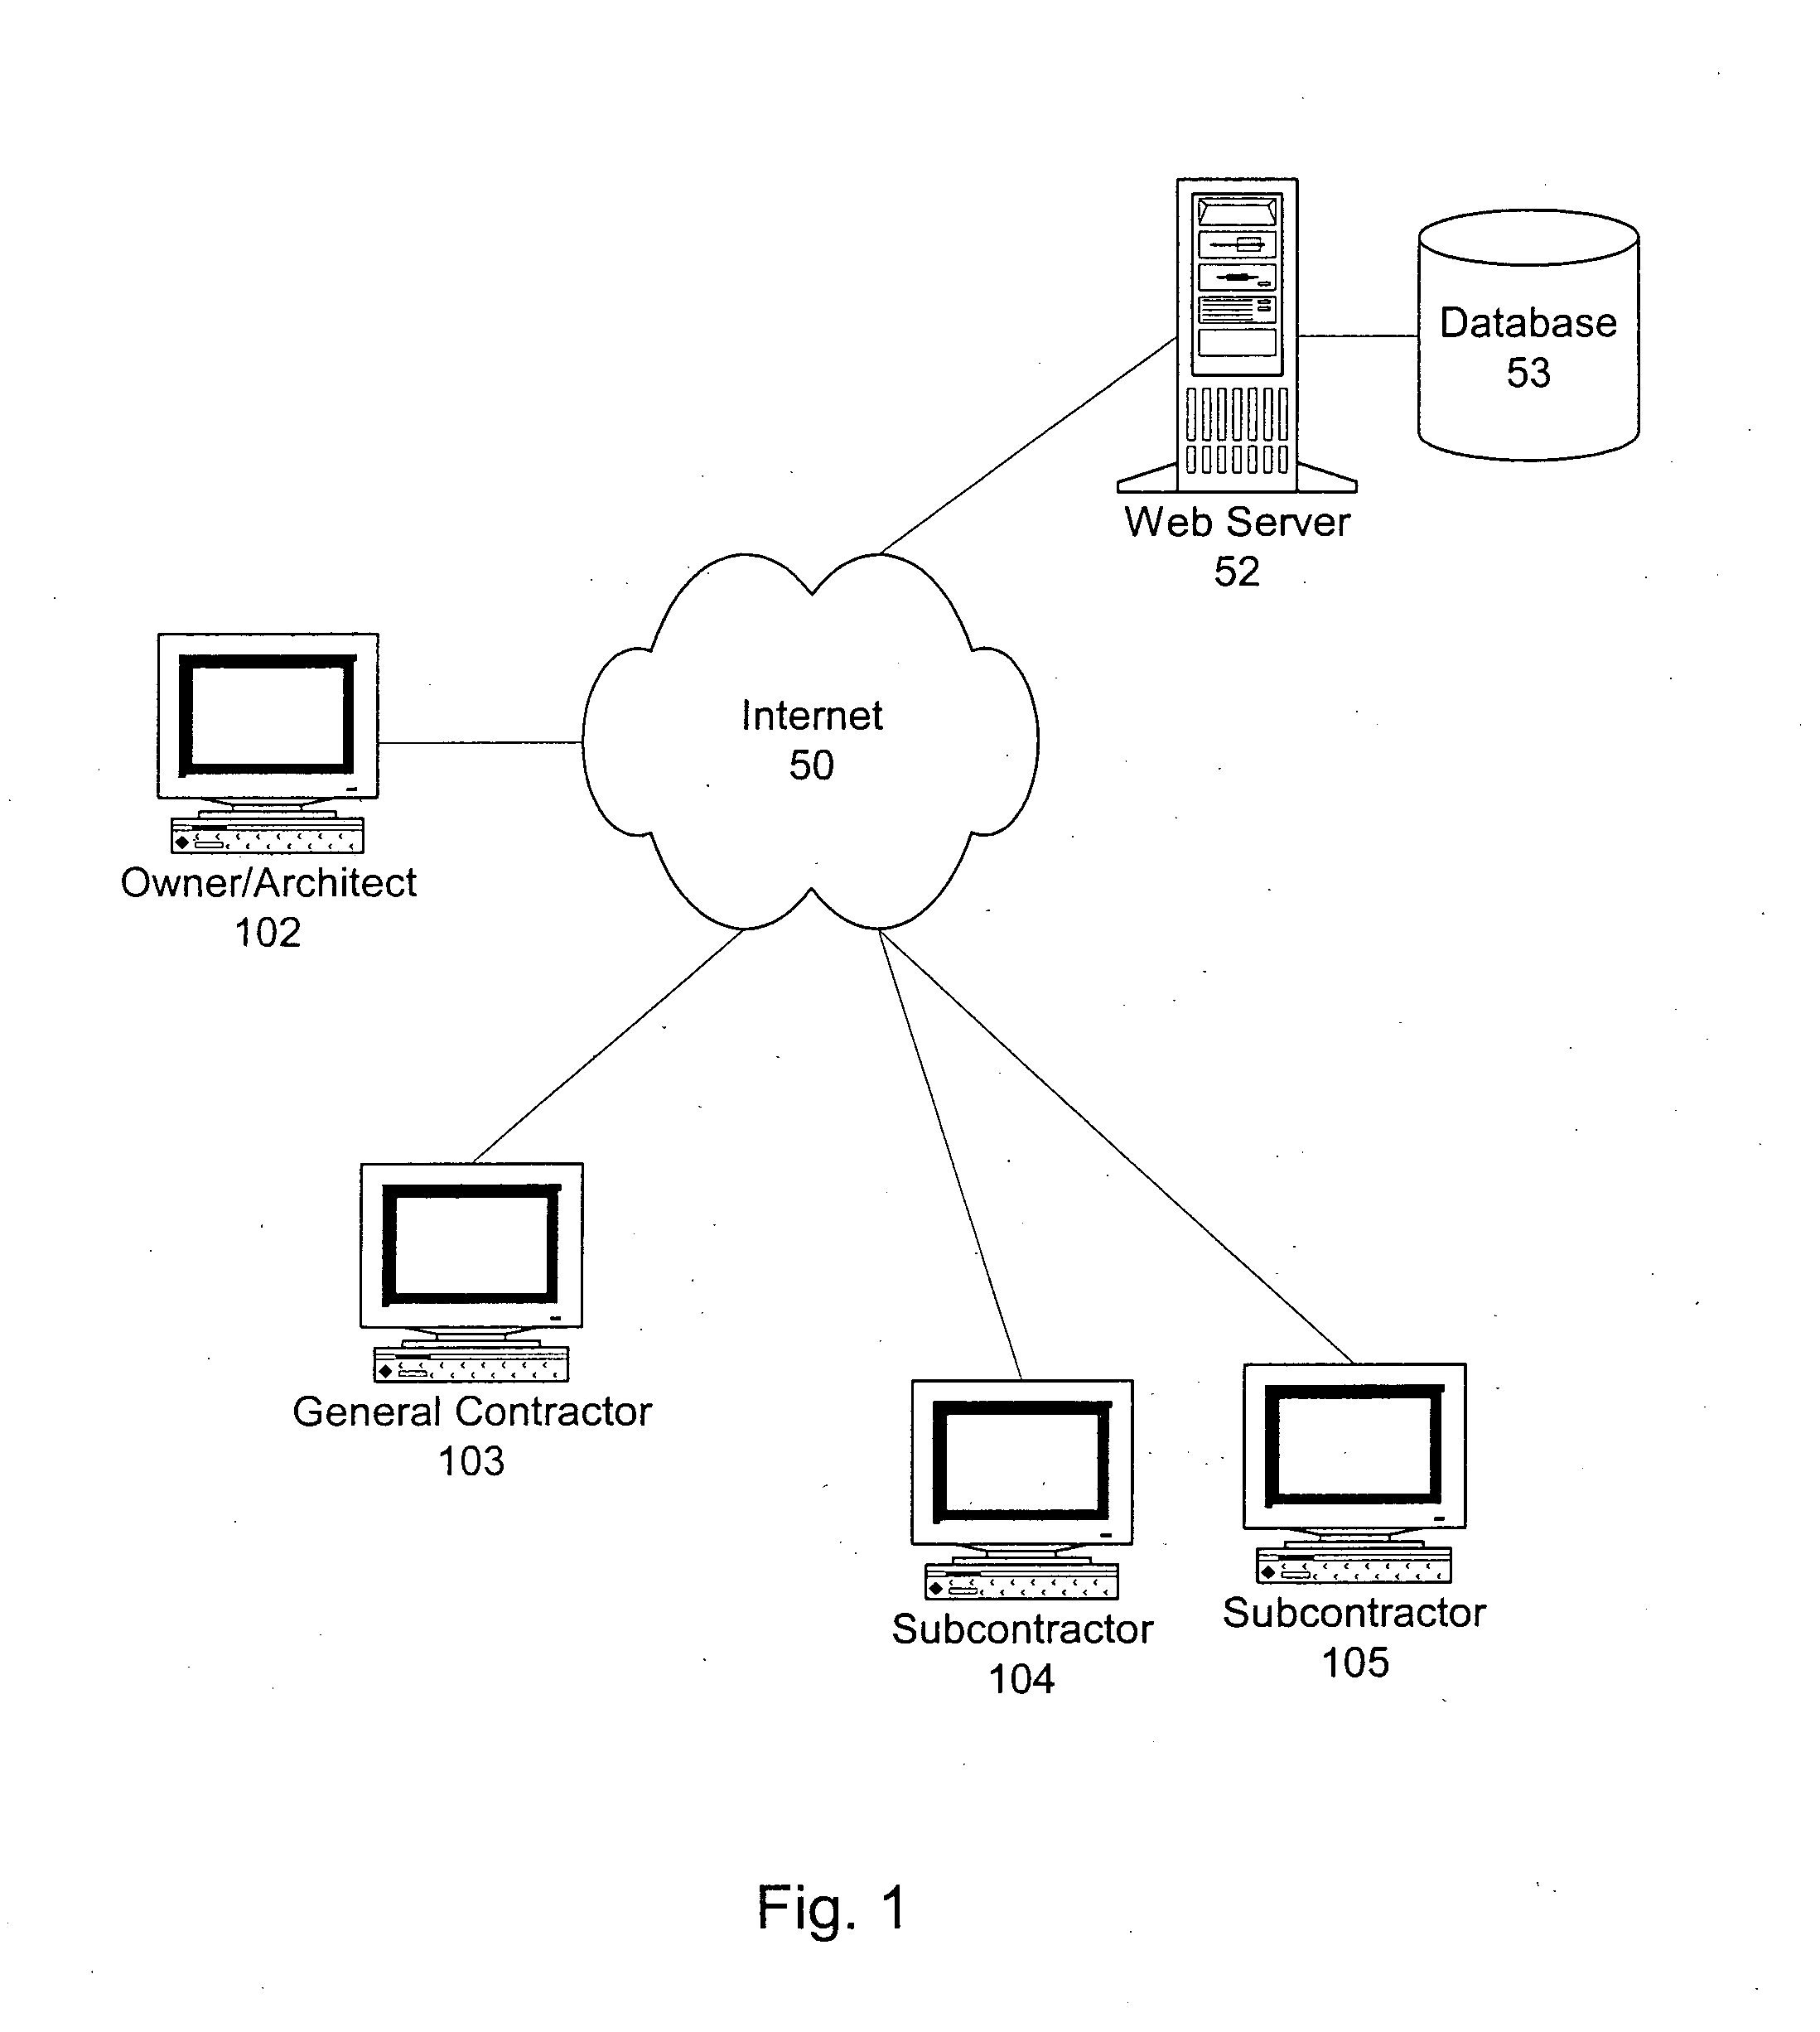 Administering a contract over a data network